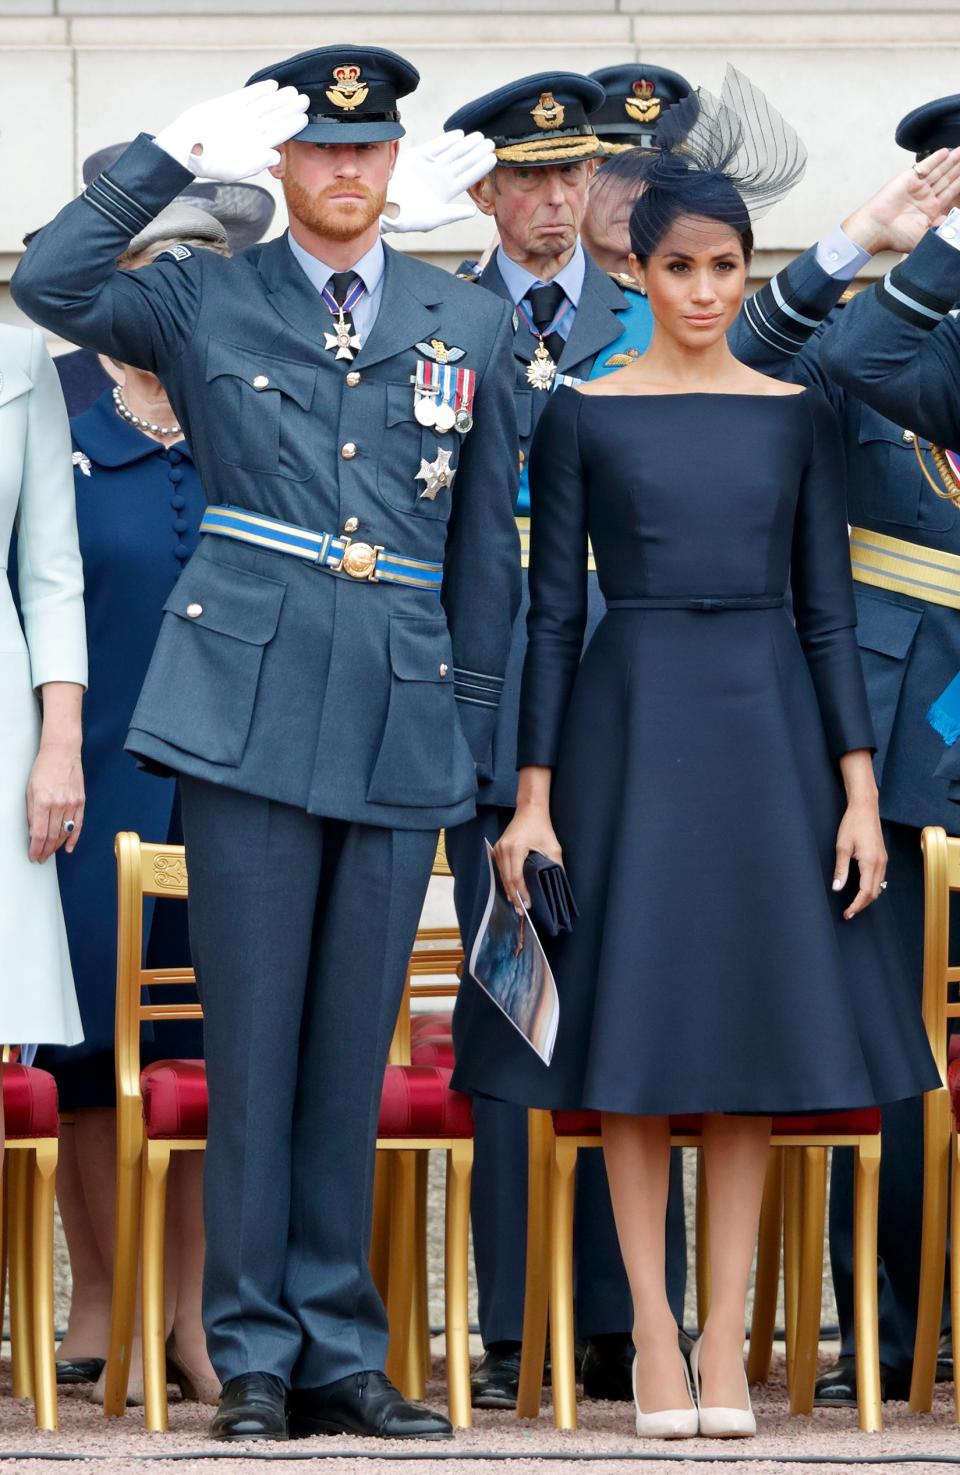 Harry saluting in a dark blue uniform and hat and Meghan in dark navy fit and flare tea length dress and matching fascinator.